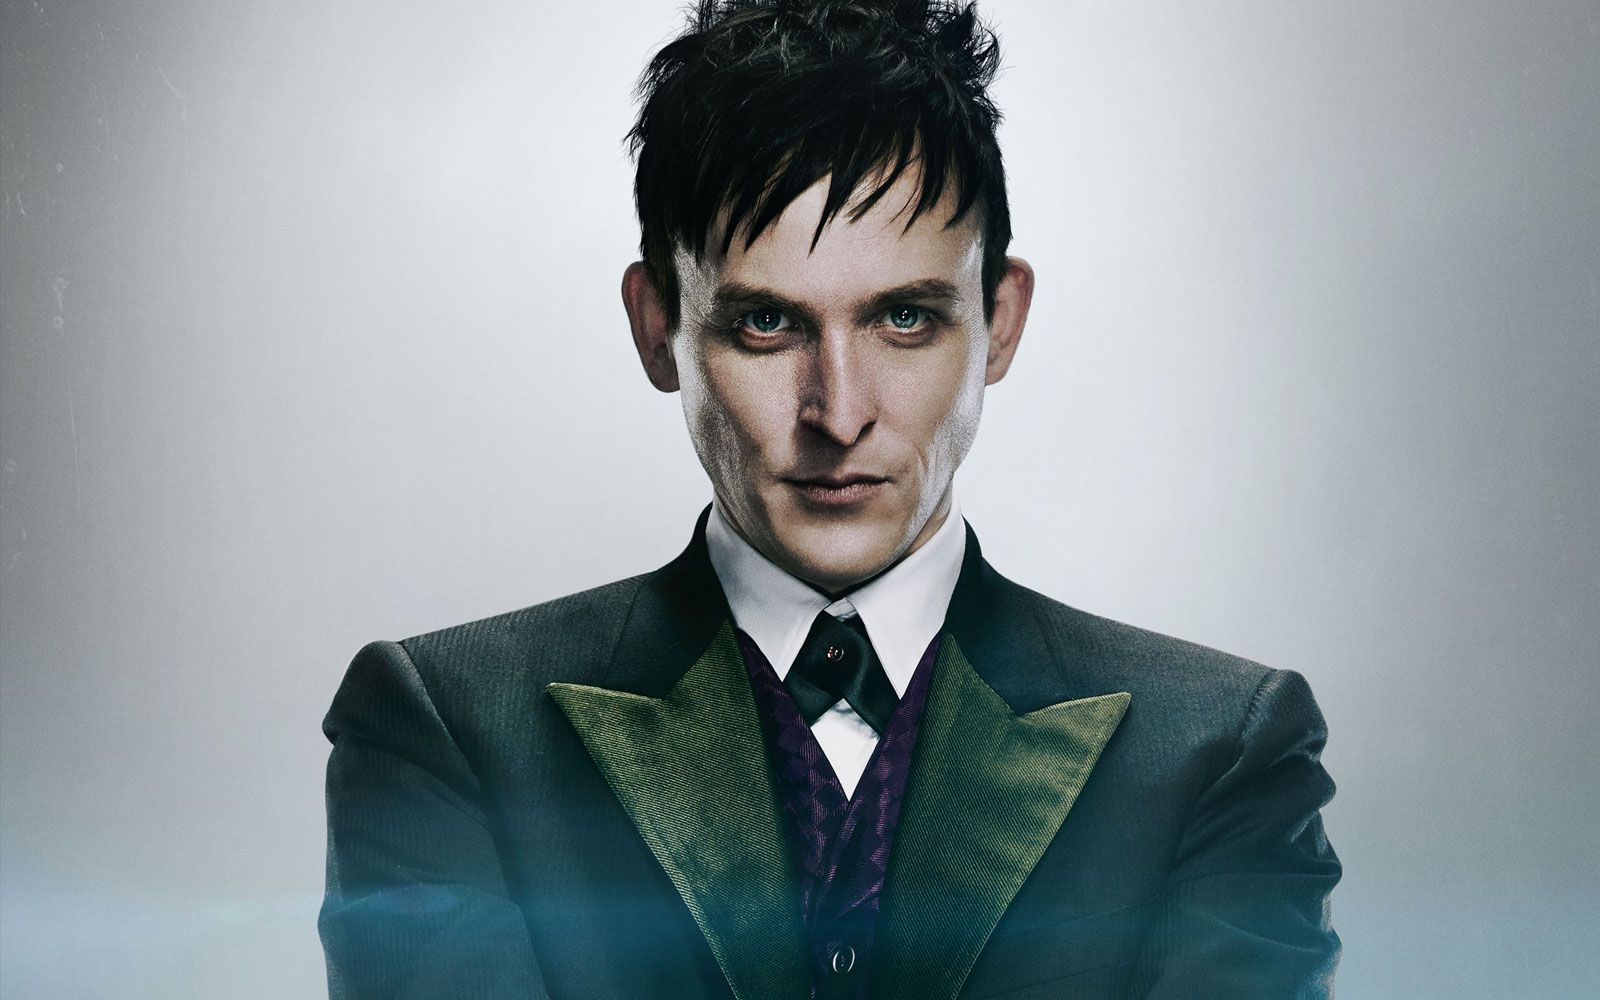 Why is Oswald Cobblepot called Penguin?